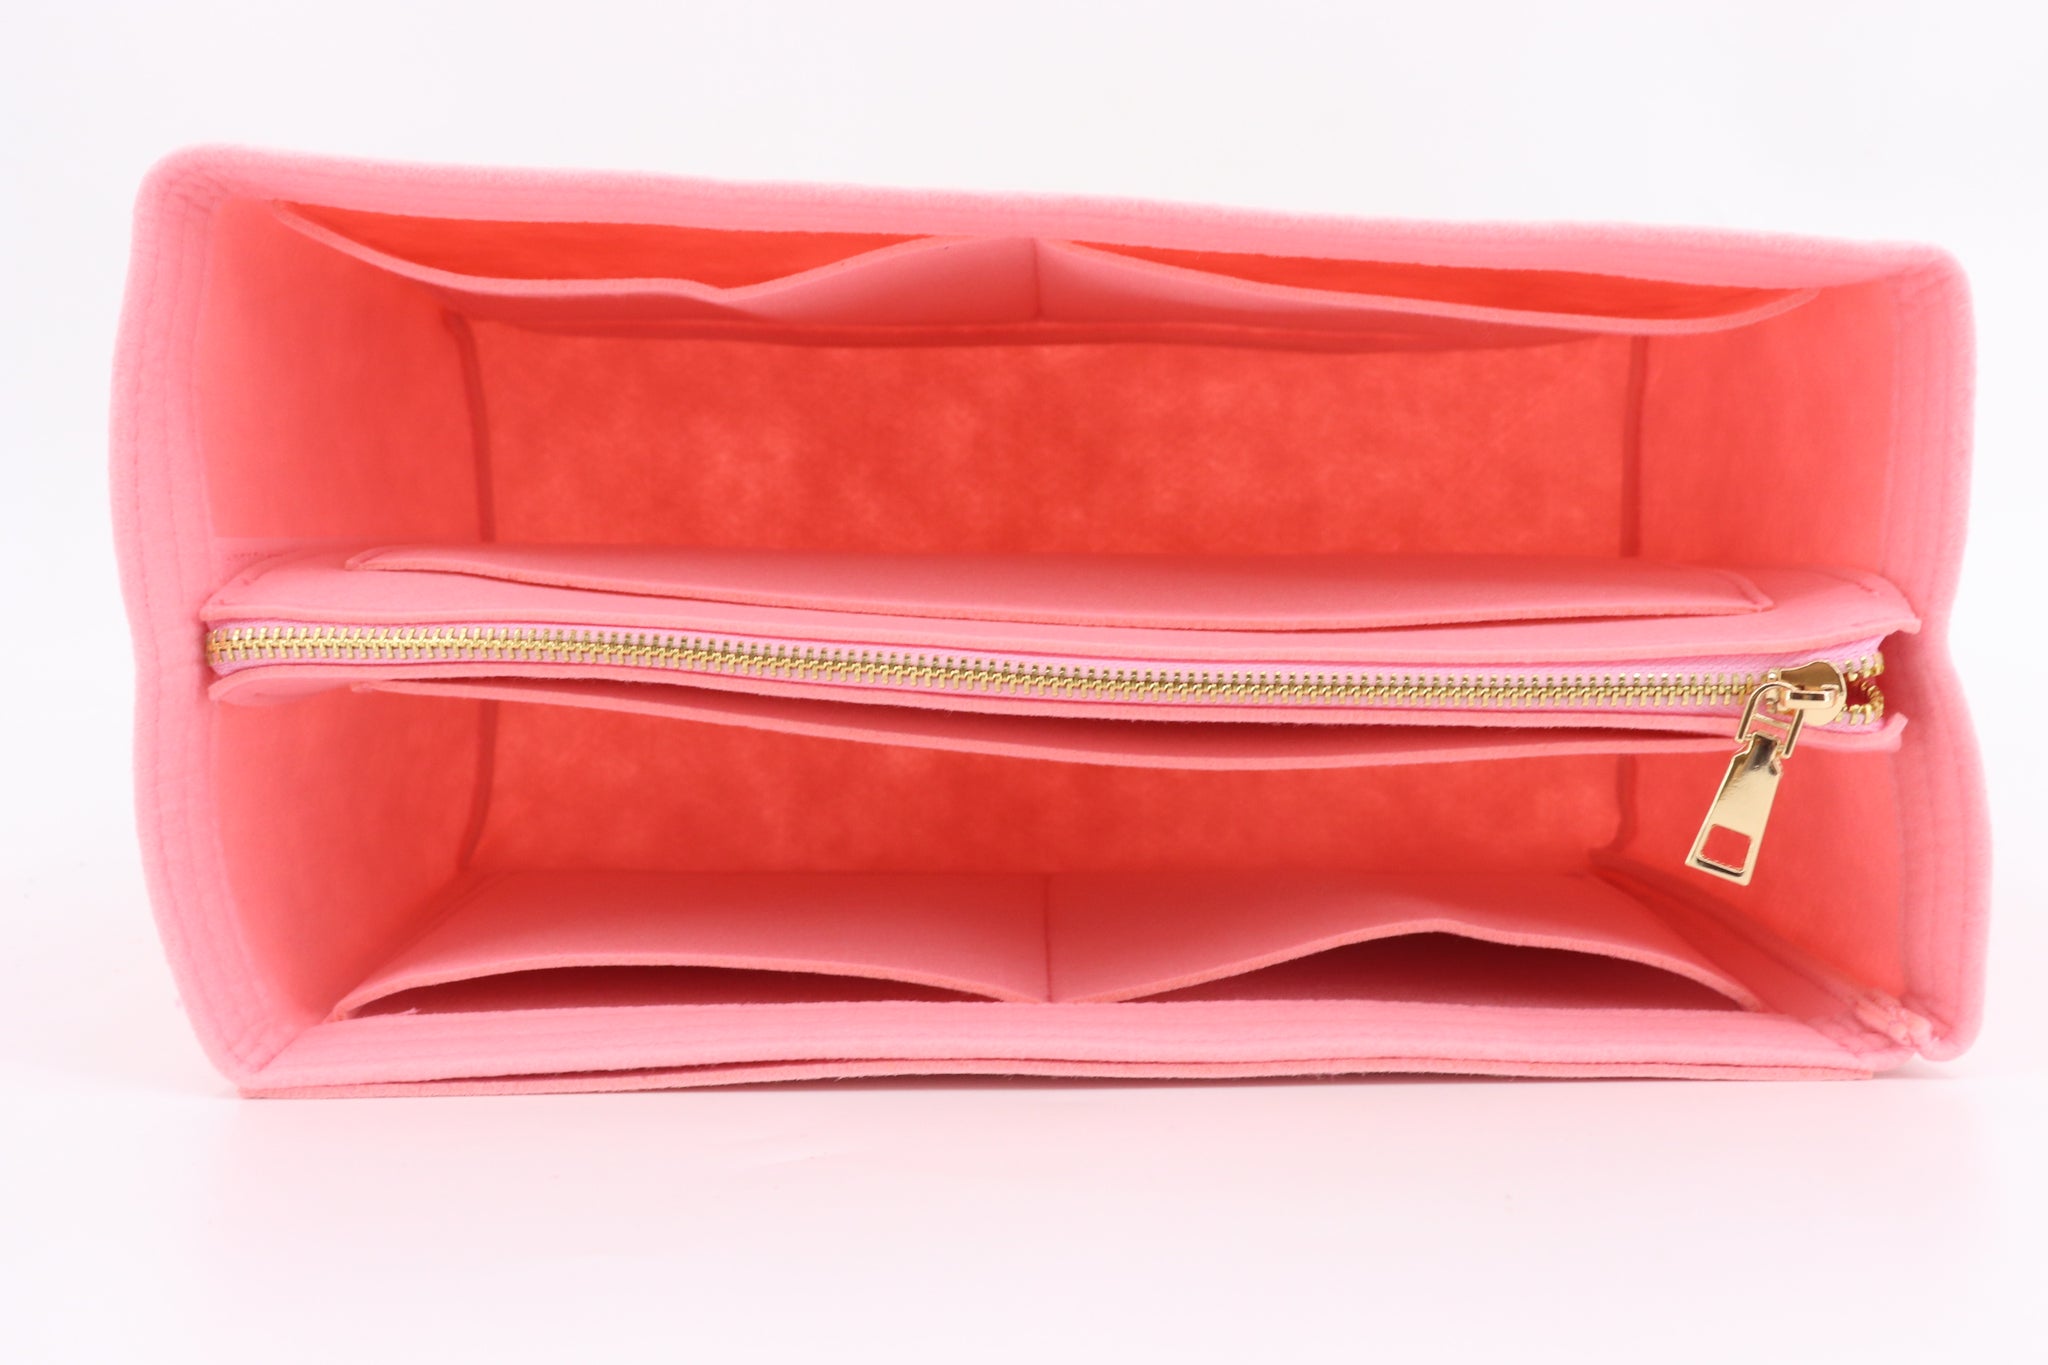 Graceful PM / MM Suedette Regular Style Leather Handbag Organizer (Rose  Pink) (More Colors Available)